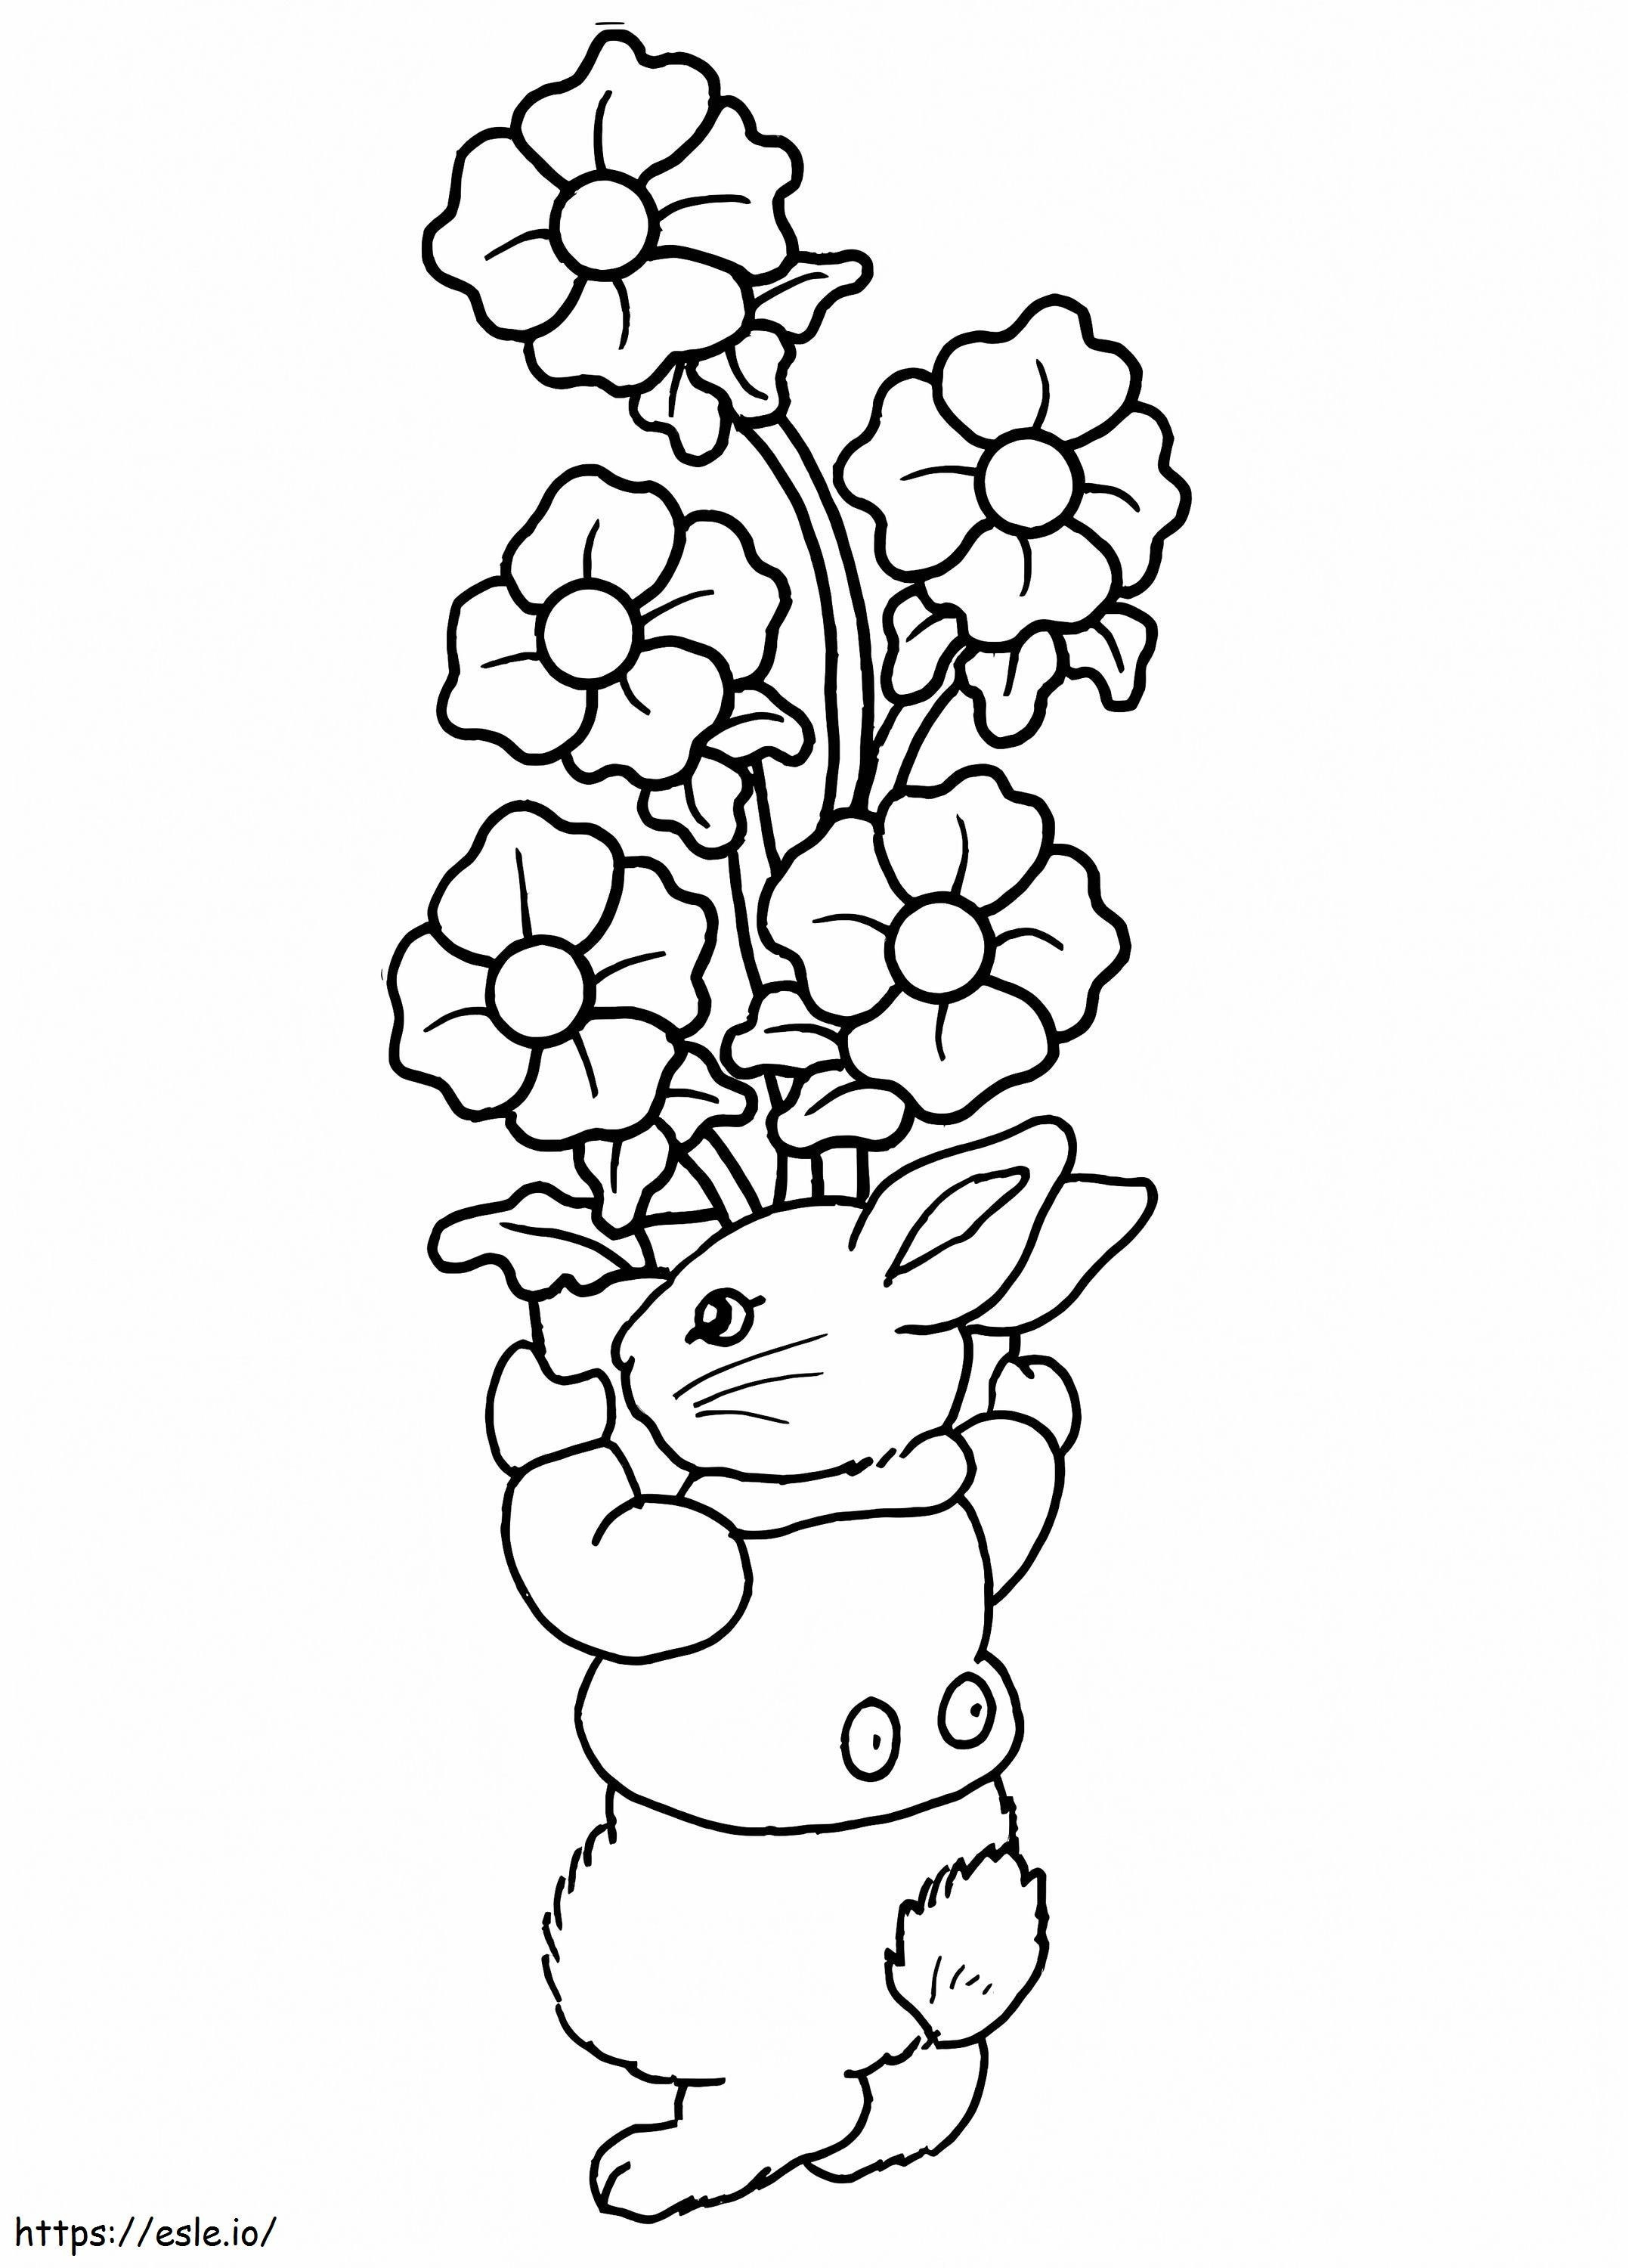 Easter Bunny With Flowers coloring page